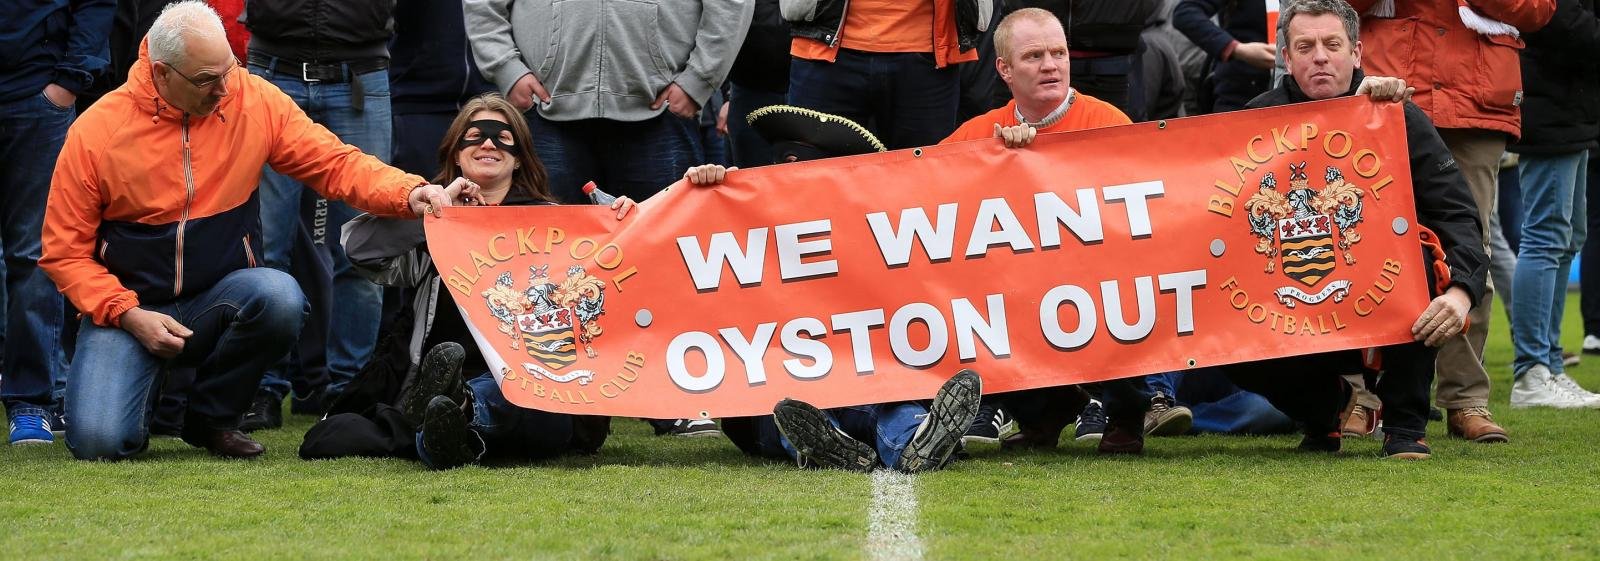 Off-field squabbles continue to overshadow Blackpool’s on-field success